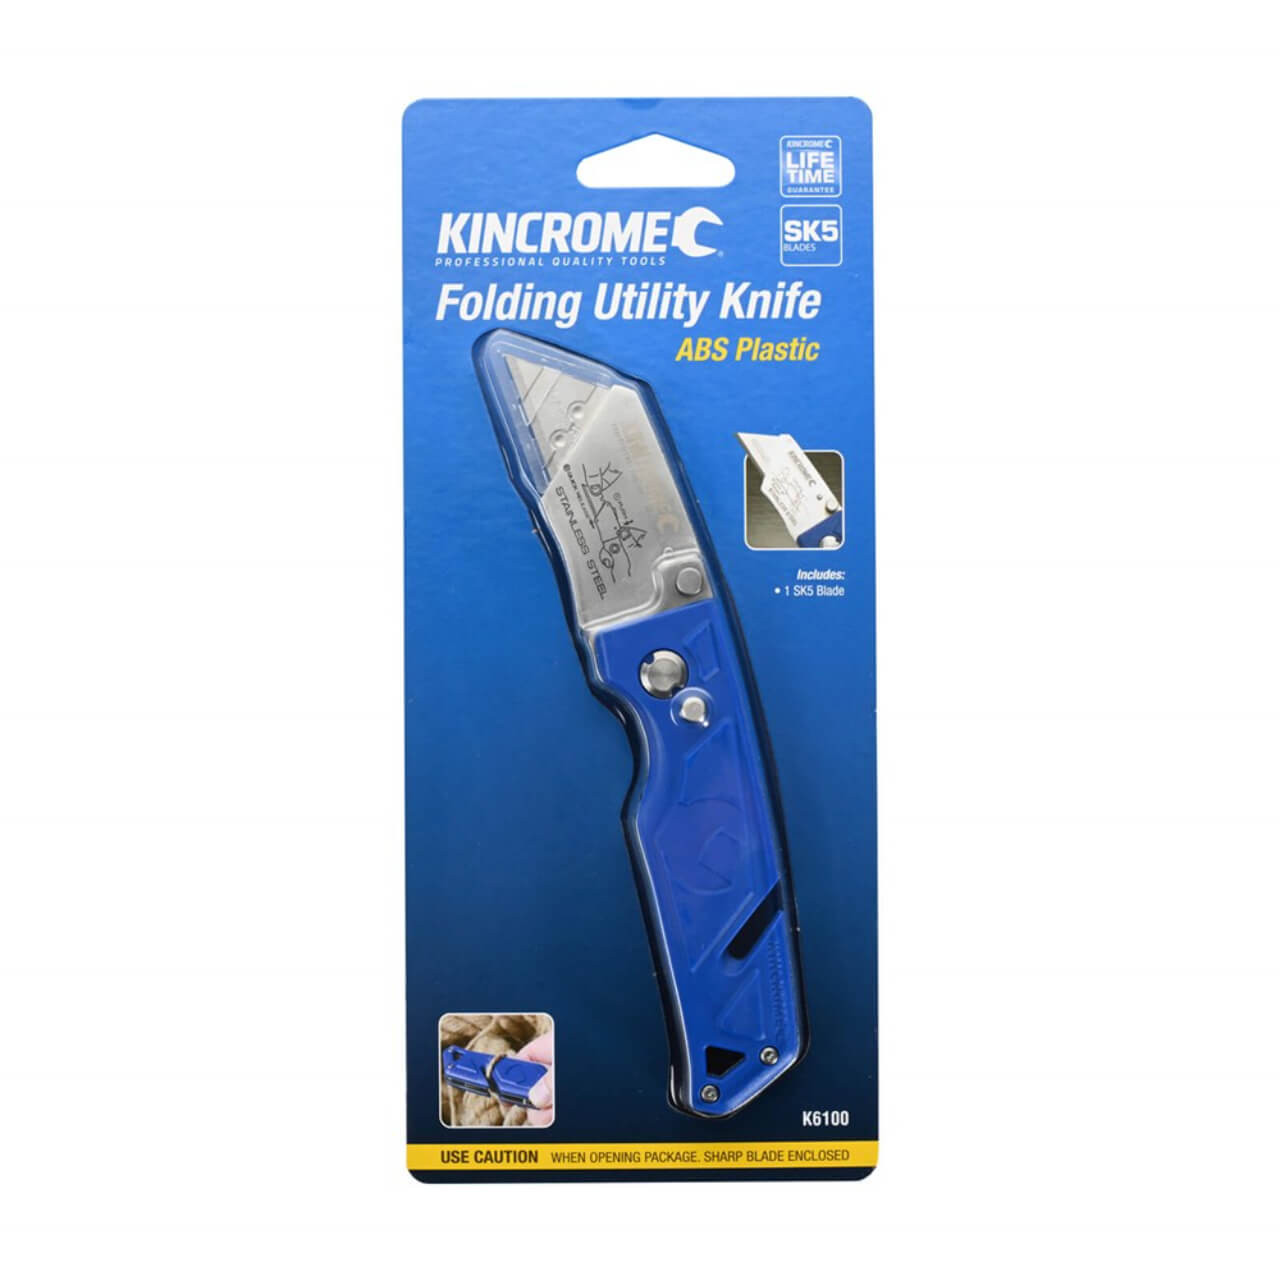 Kincrome Plastic Folding Utility Knife - ACL Industrial Technology